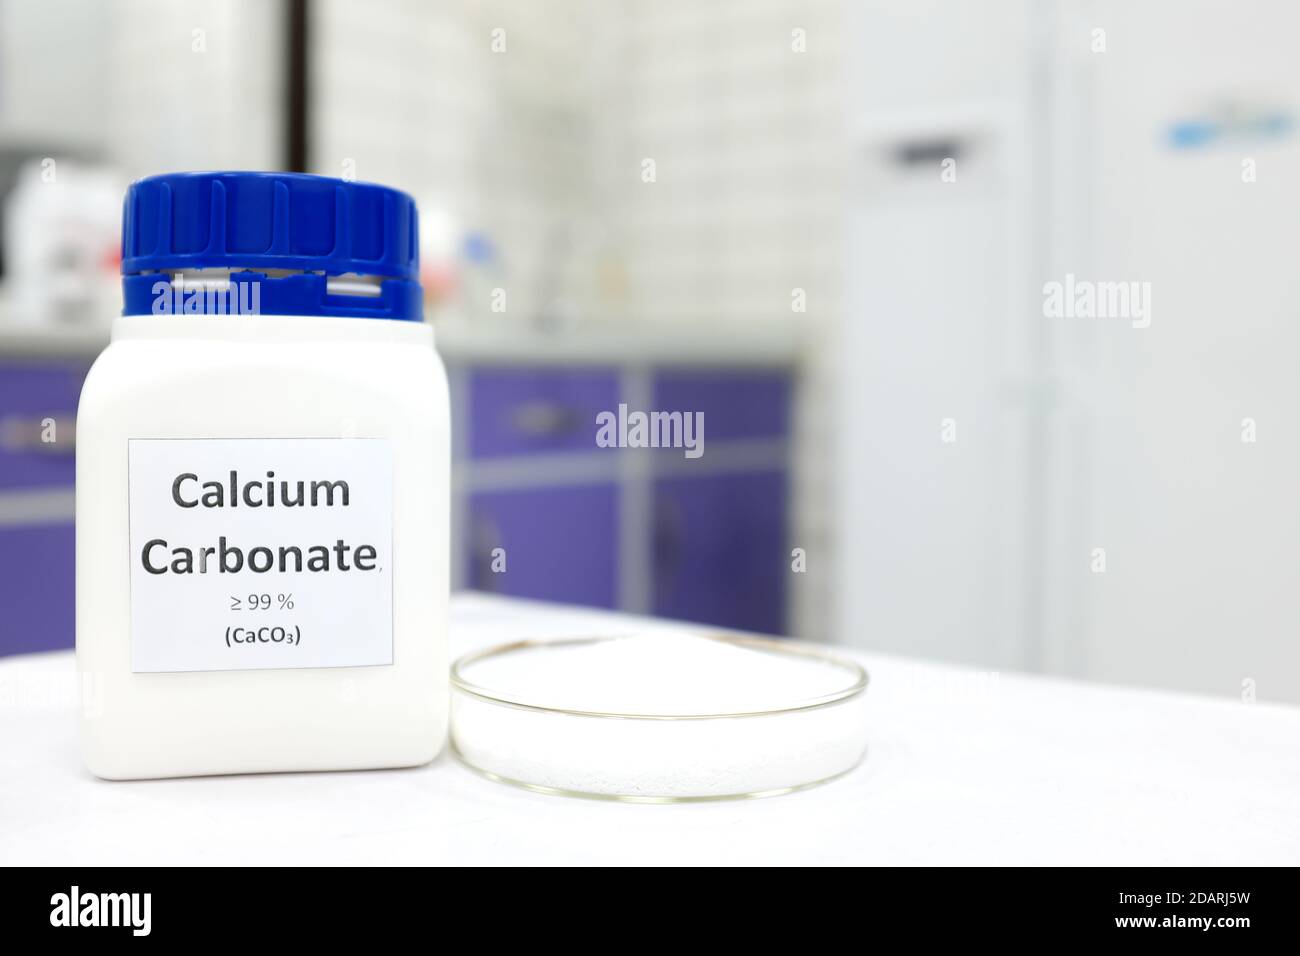 Selective focus of a bottle of calcium carbonate chemical compound or soda ash beside a petri dish with solid crystalline powder substance. Stock Photo